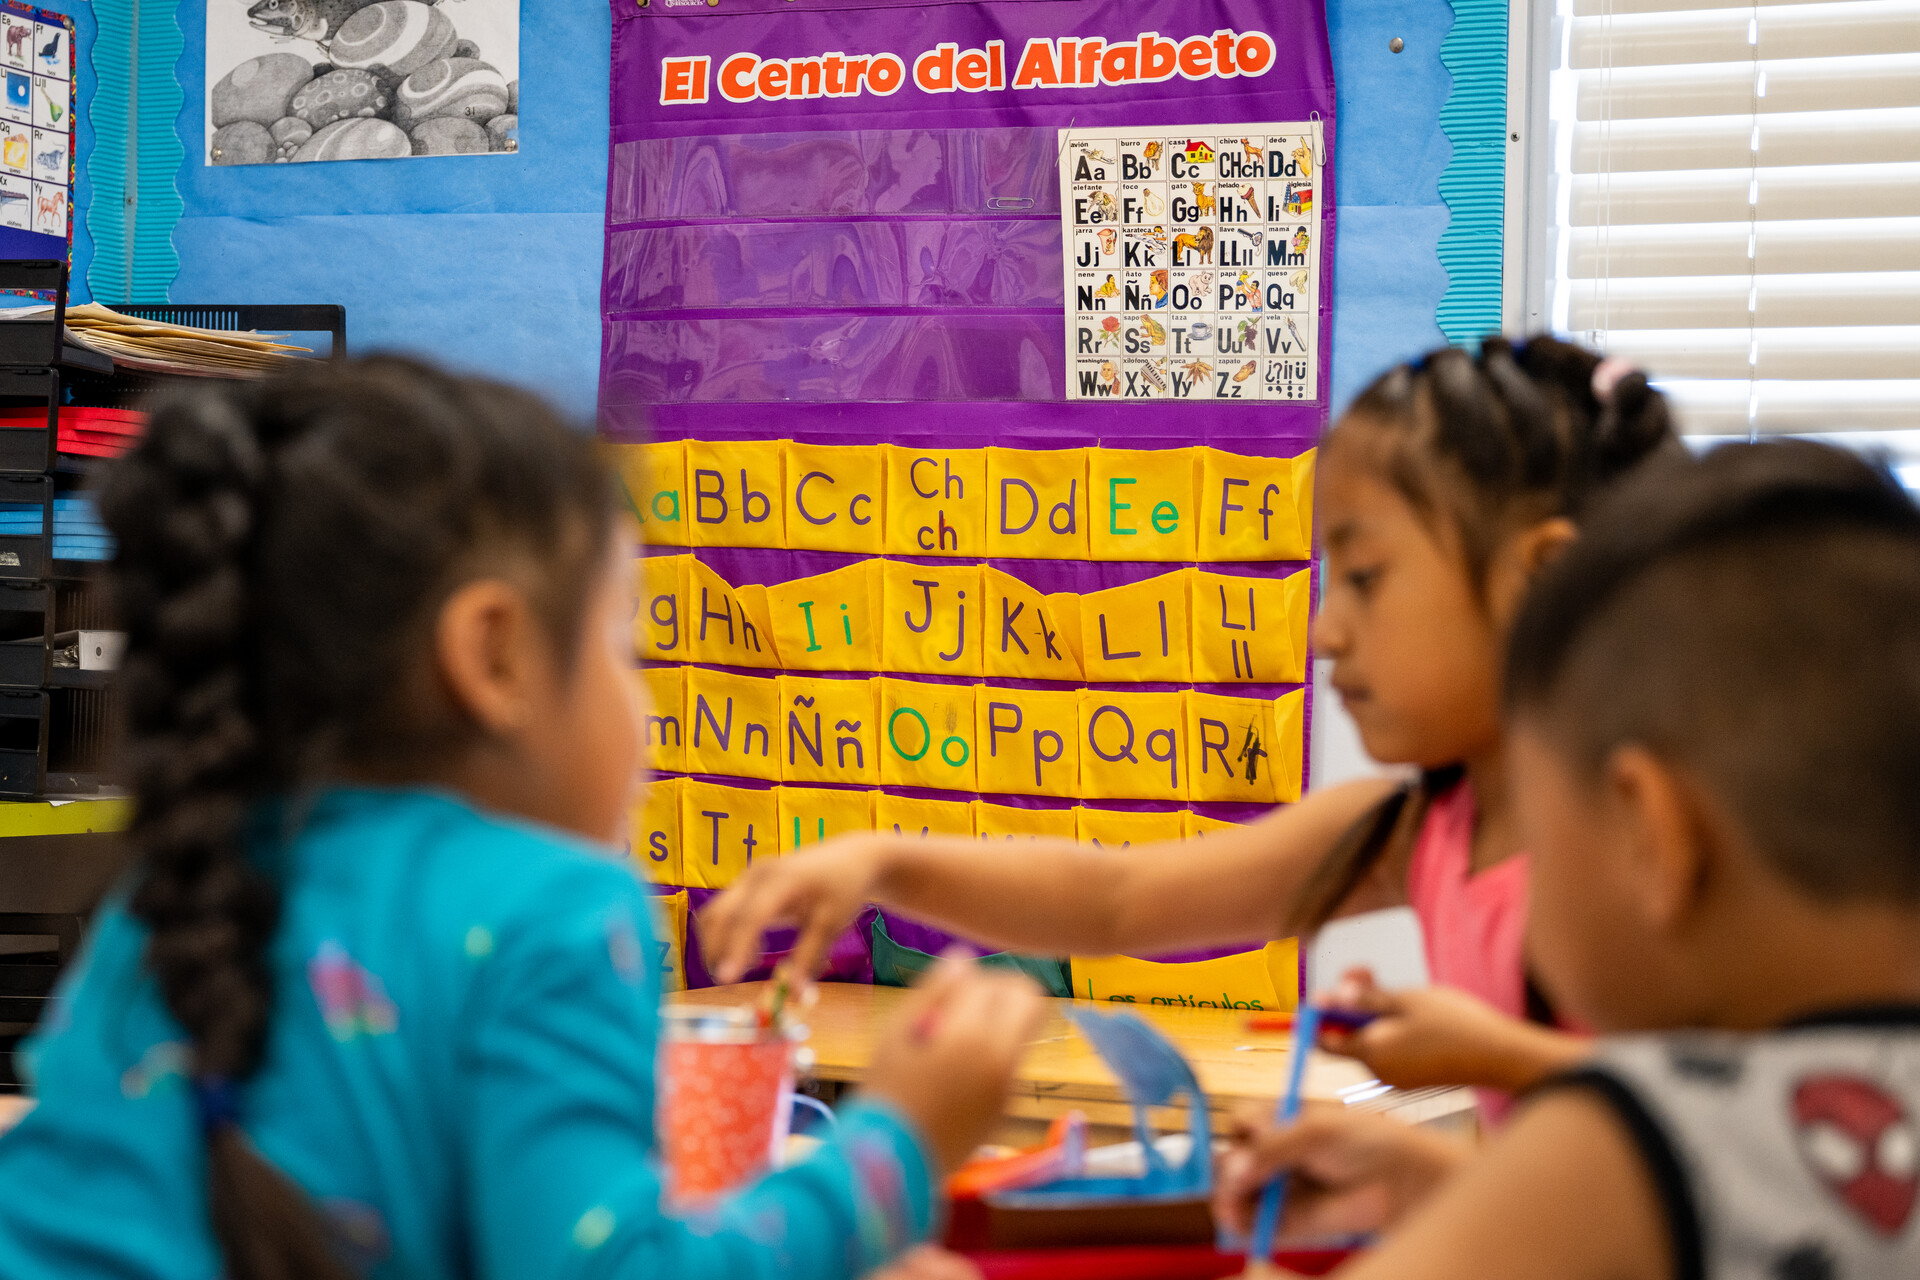 Three young children in the foreground work on an exercise as a bilingual alphabet hangs on the wall of a classroom behind them